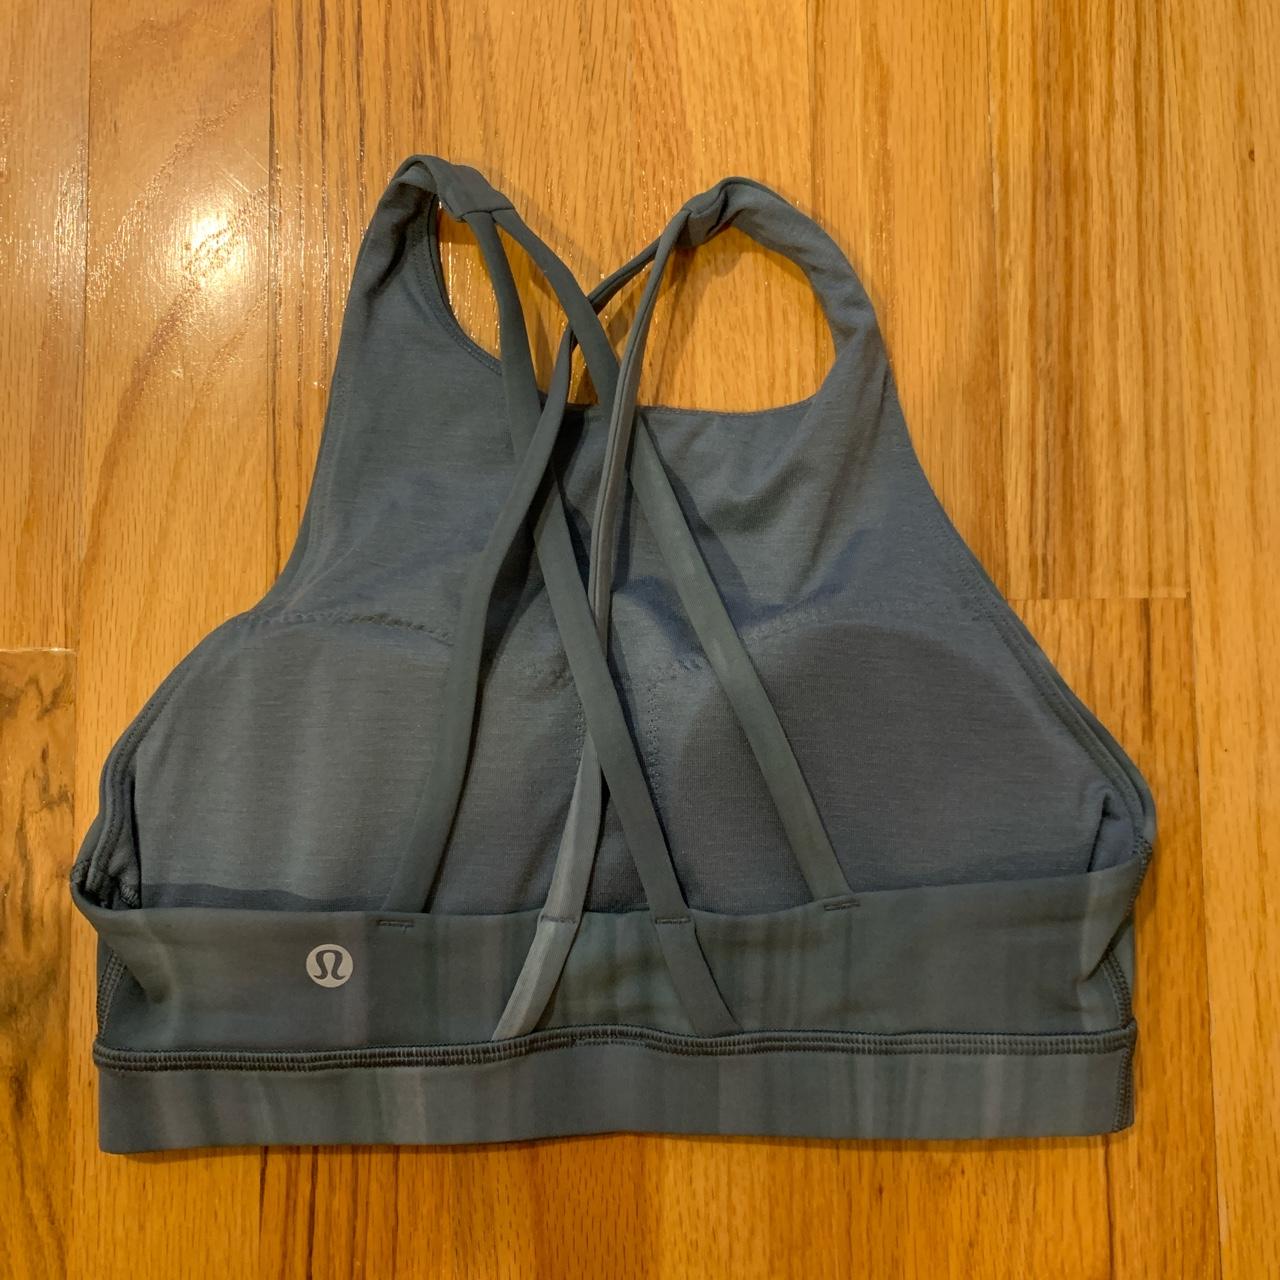 lululemon high neck sports bra with cup inserts.